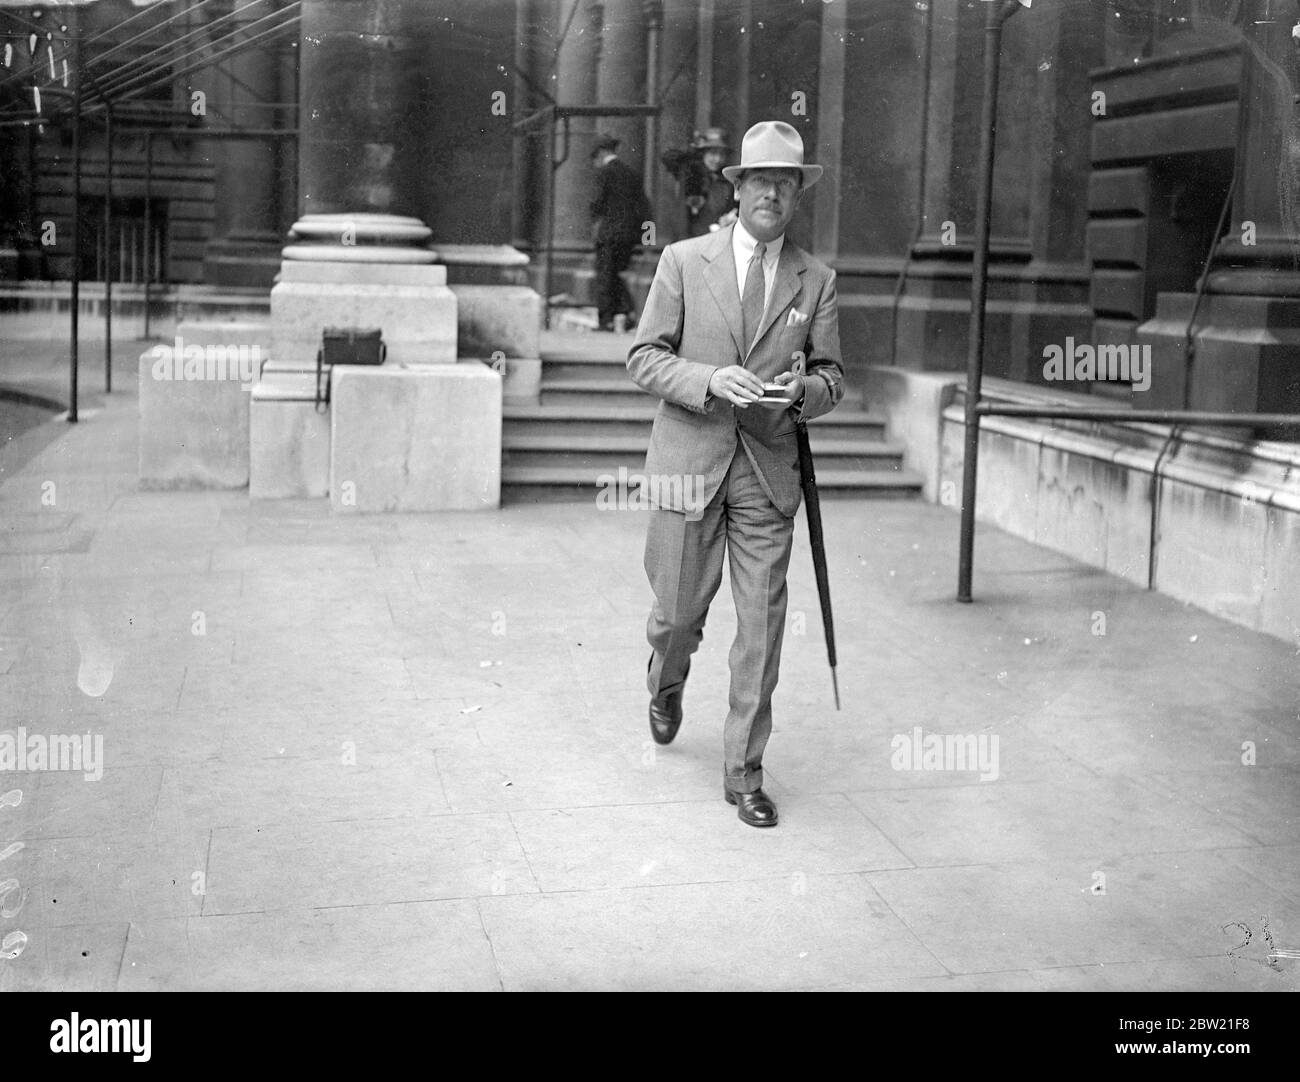 Mr R. G. Howe leaving the Foreign Office after his call. He is to make an air dash to China to take over the duties of Sir Hughe Knatchbull-Hugessen, shot British Ambassador. Mr R. Mr R. G. Howe was called at the Foreign Office to receive final instructions before leaving. Mr Howe was councillor at the Nanking Embassy [Nanjing] from May 1934 onwards. He will leave almost at once for China to resume his old duties to act as Charge d'Affaires in the emergency. Mr Howe is one of the few members of the diplomatic service to have attended elementary school. 28 August 1937 Stock Photo